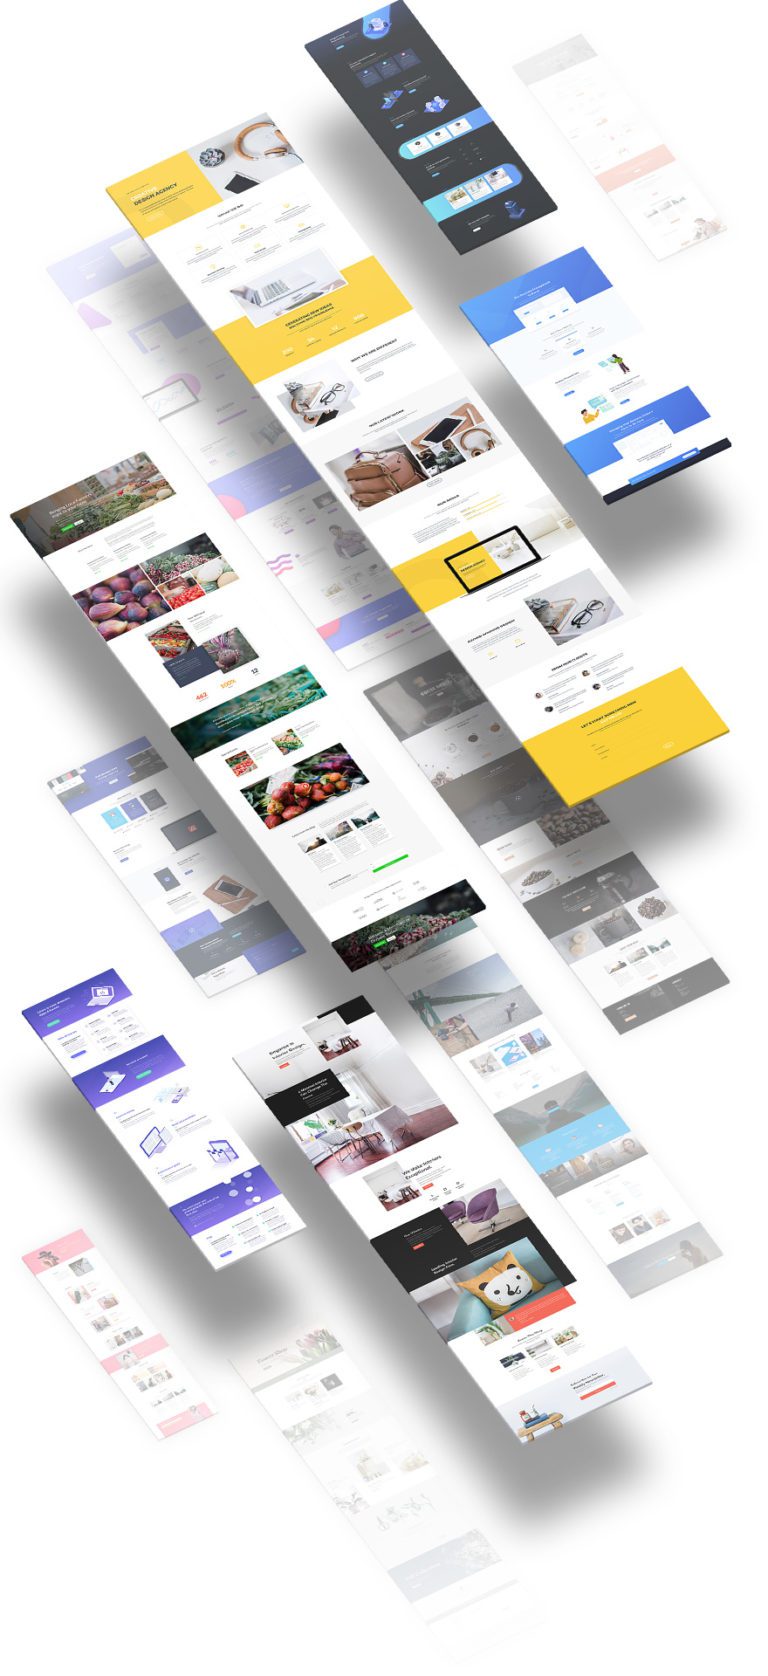 Over 140 Amazing Divi Layouts Now Available Right Inside The Divi